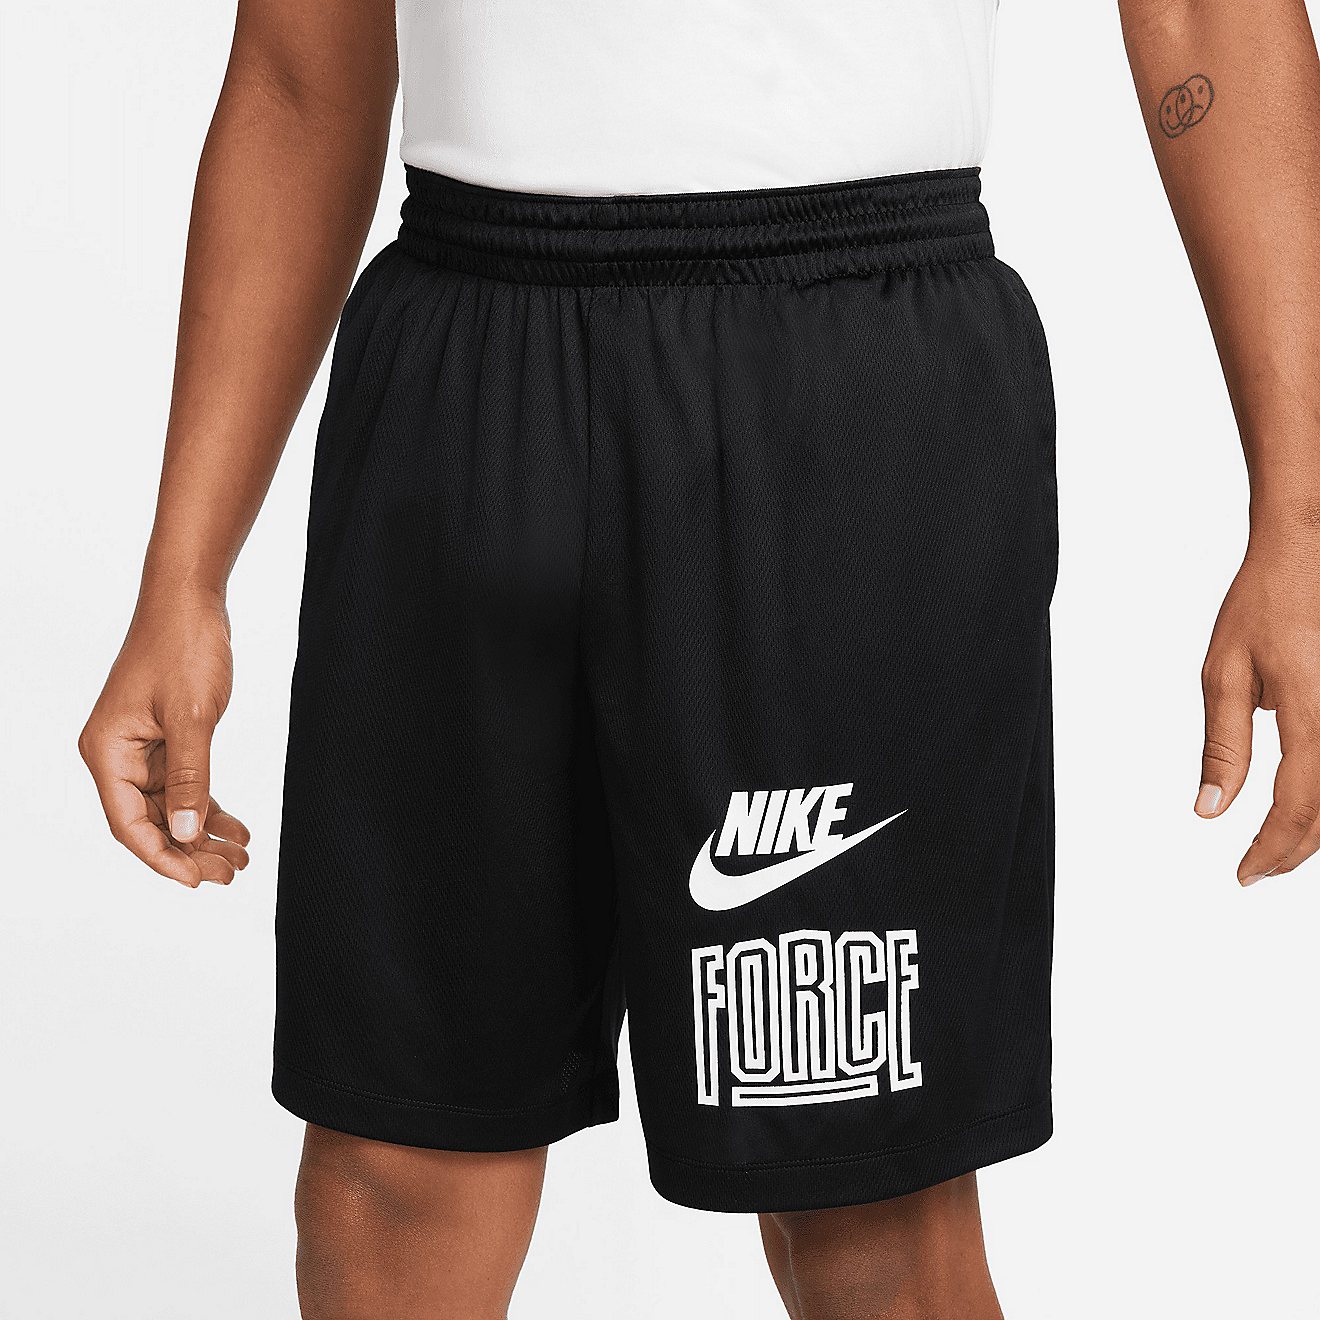 Nike Men's Starting Five HBR Basketball Shorts 8 in                                                                              - view number 2